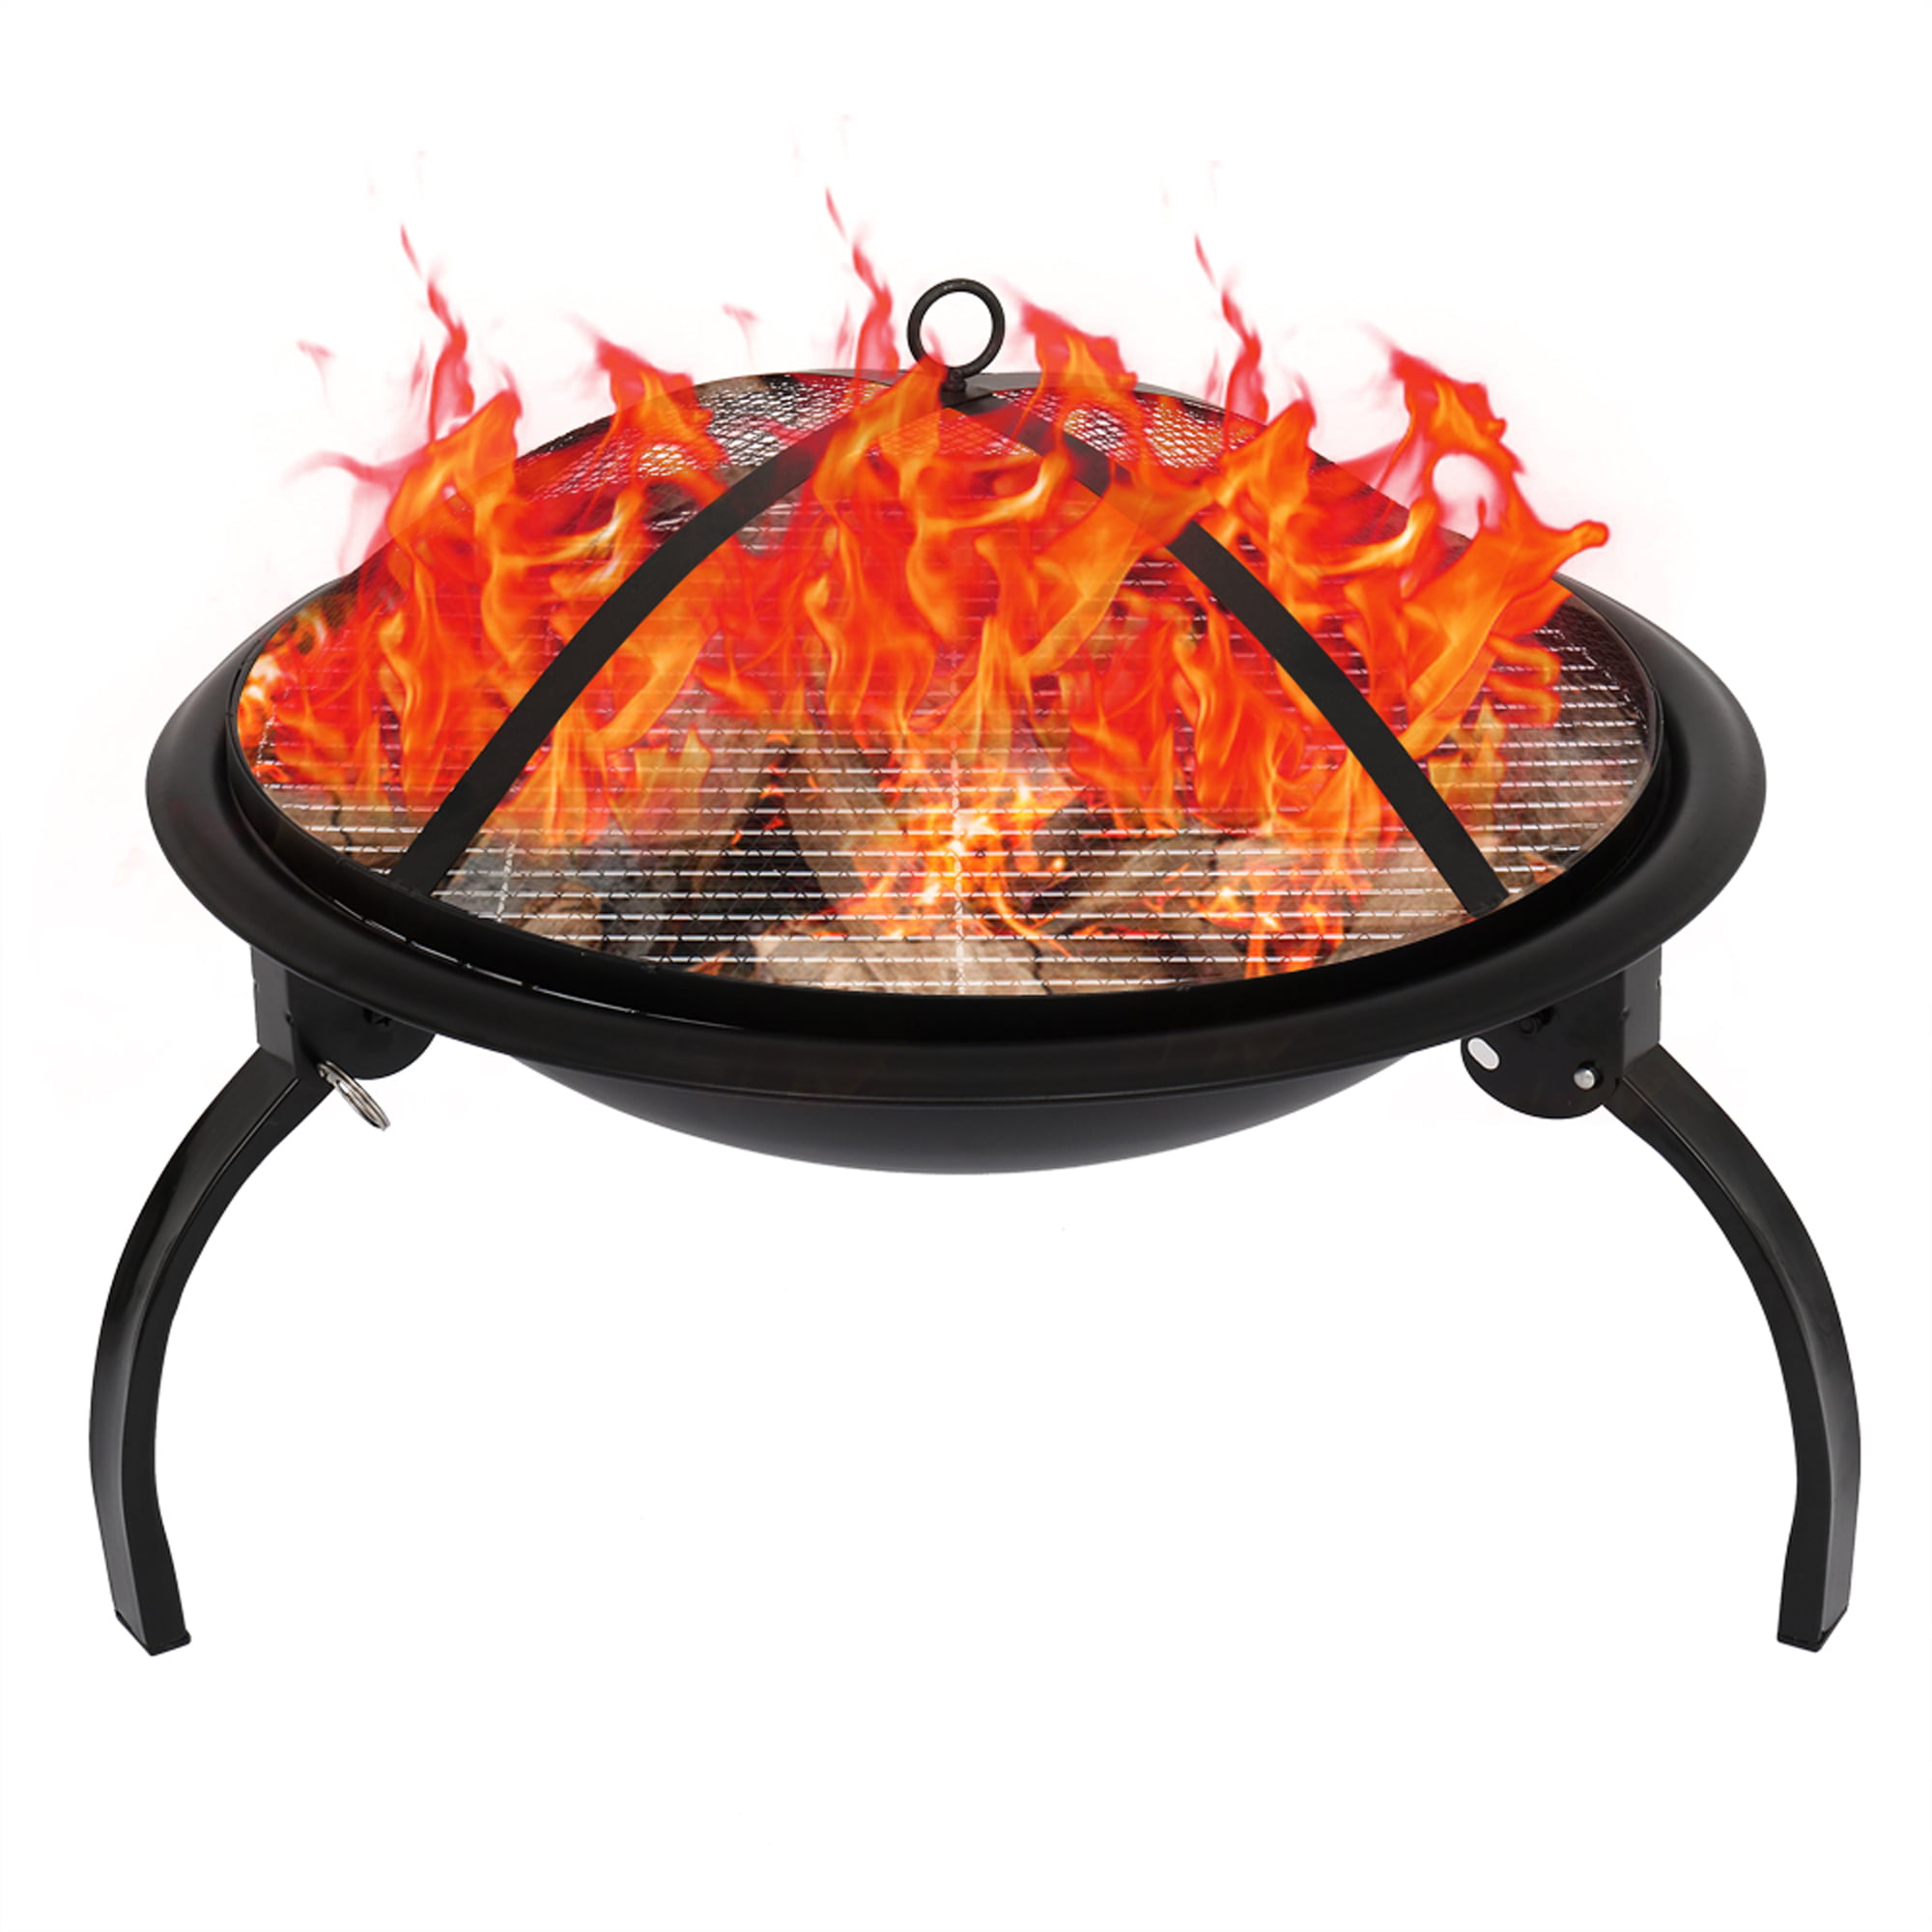 Outdoor Wood Burning Bonfire Bbq, Raised Fire Pit Camping